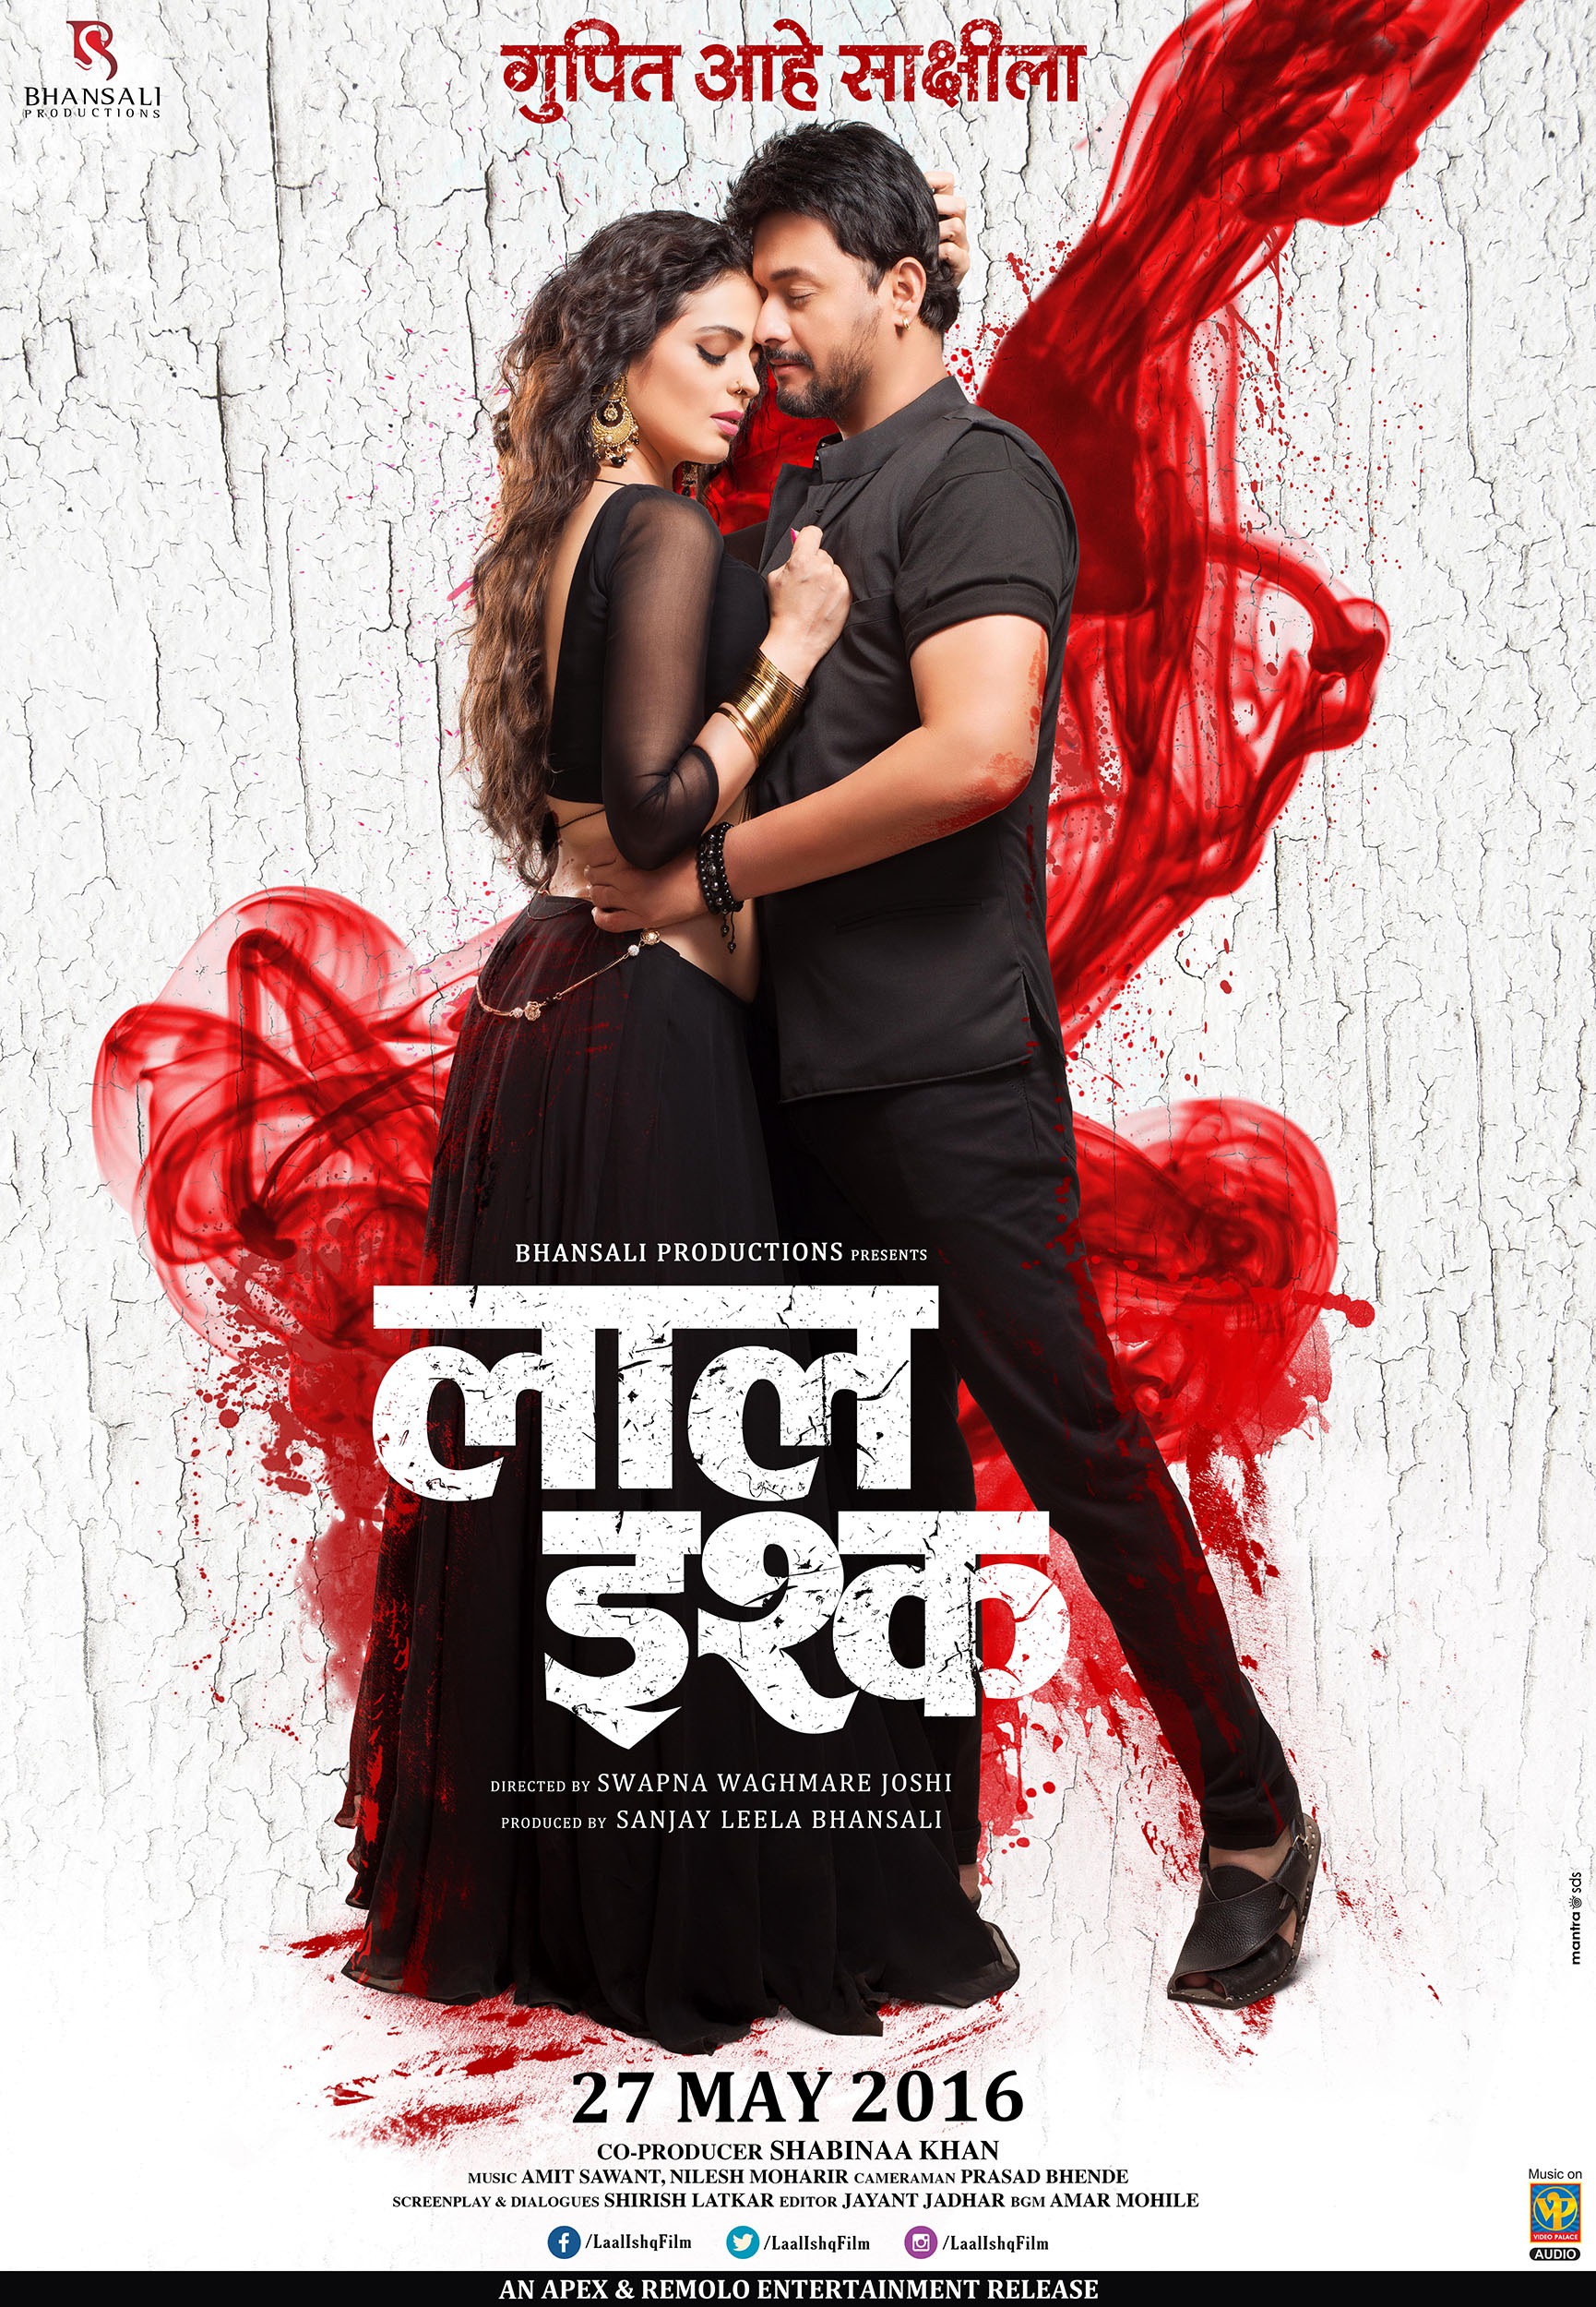 Mega Sized Movie Poster Image for Laal Ishq 